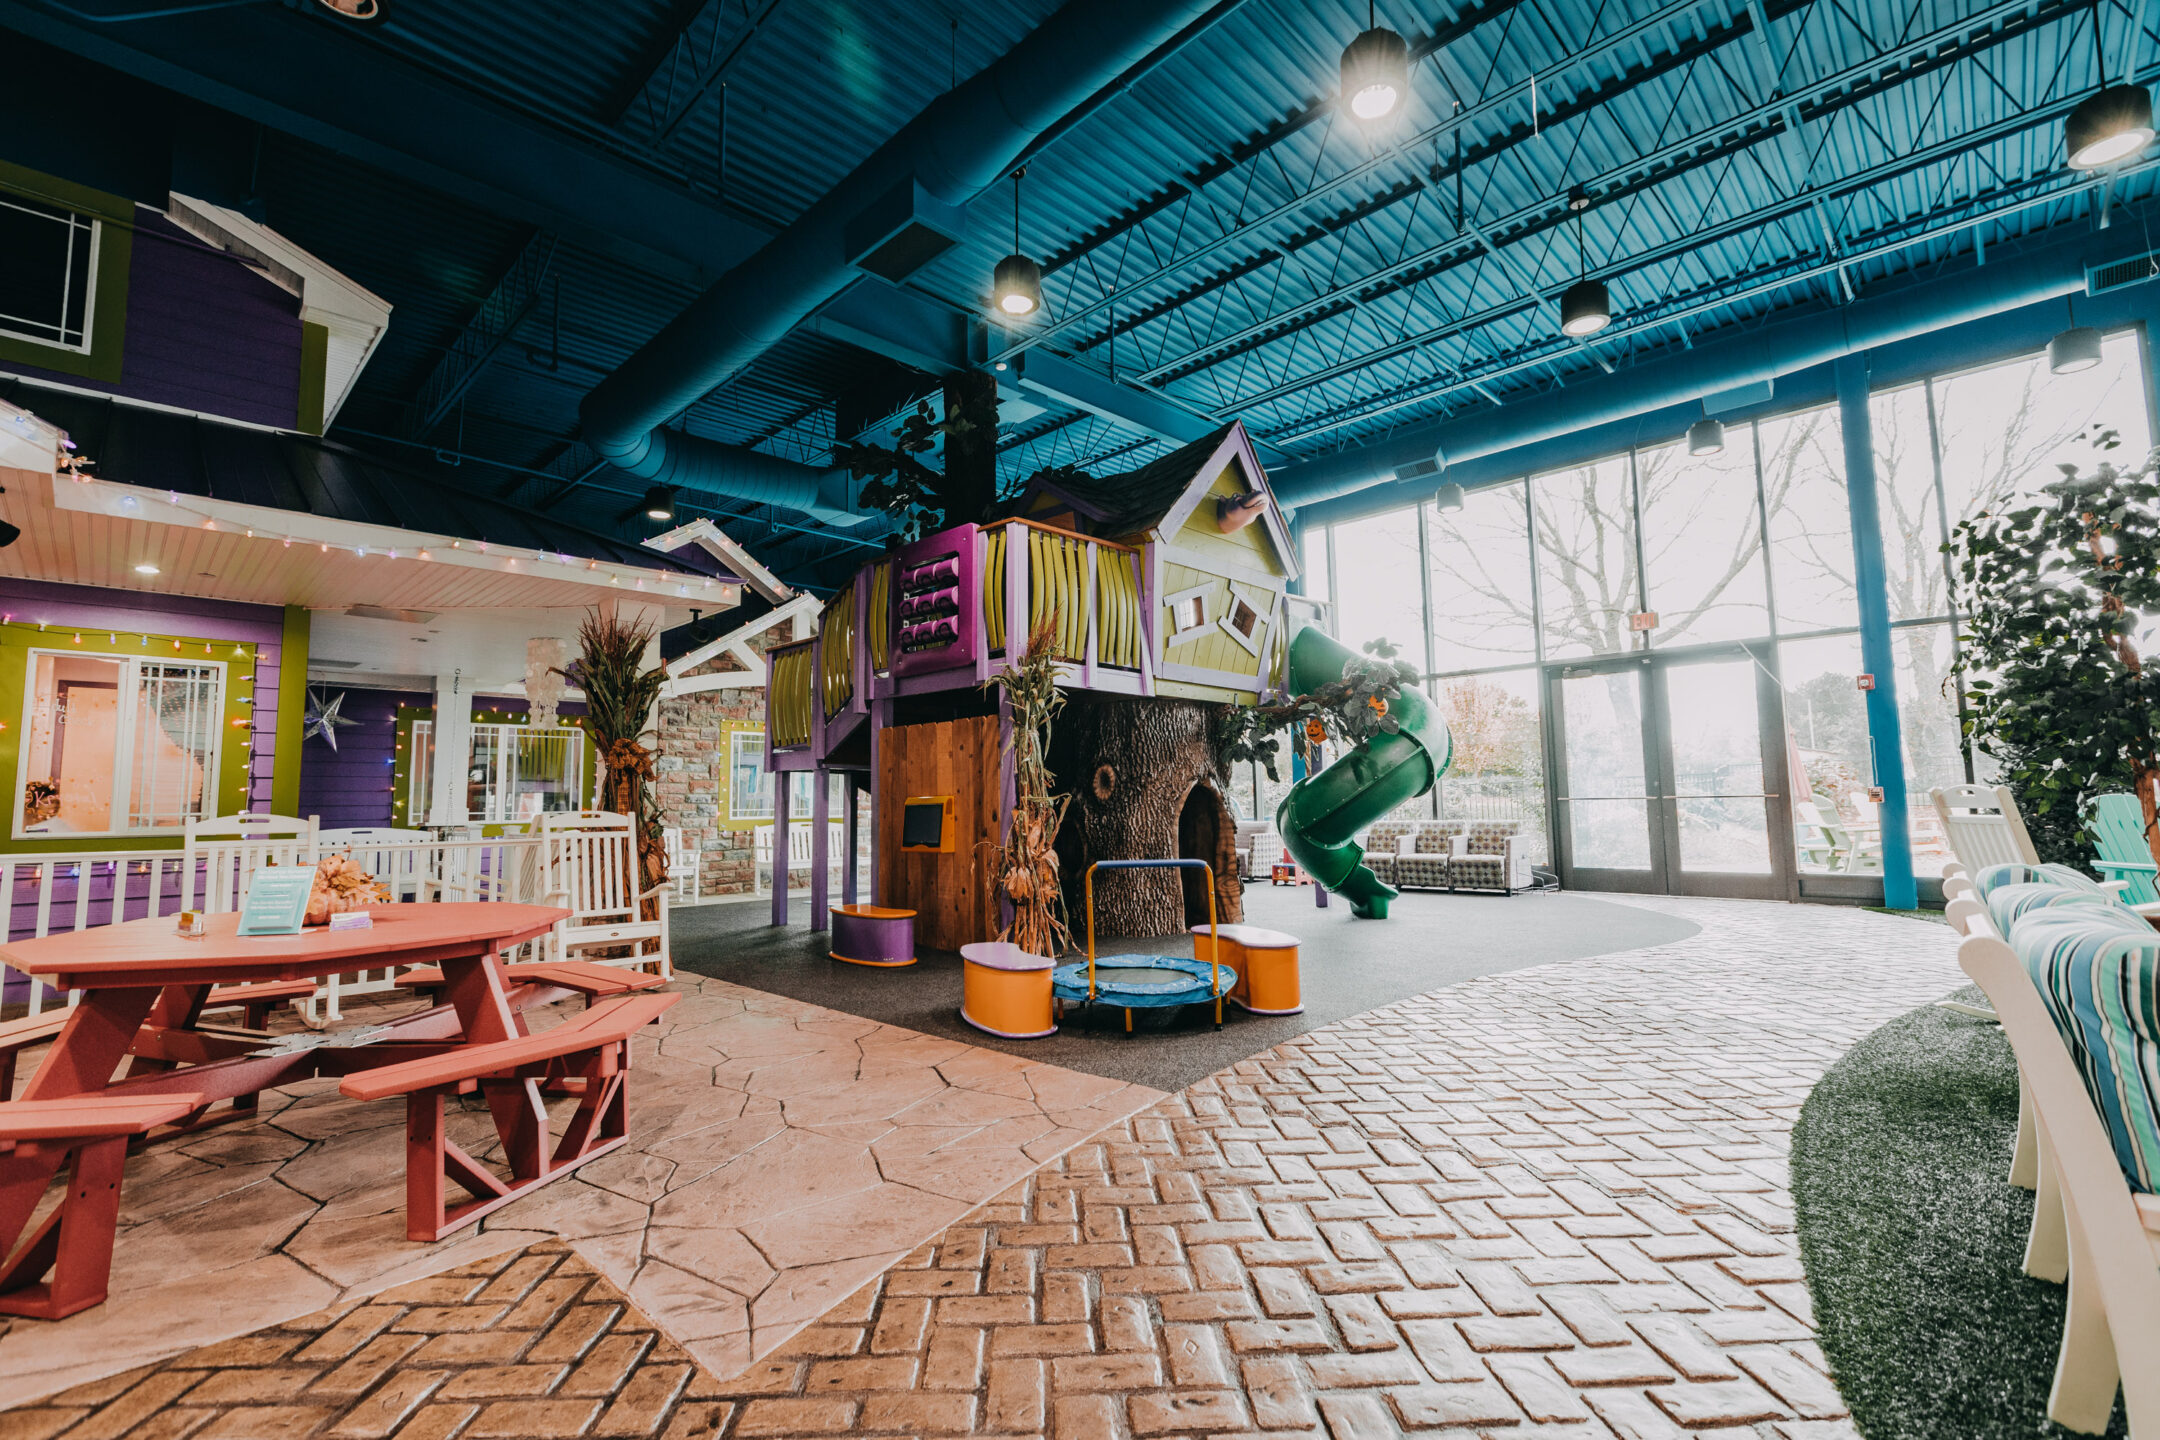 Image of kids’ space in dental office with an indoor treehouse, slide, and trampoline.